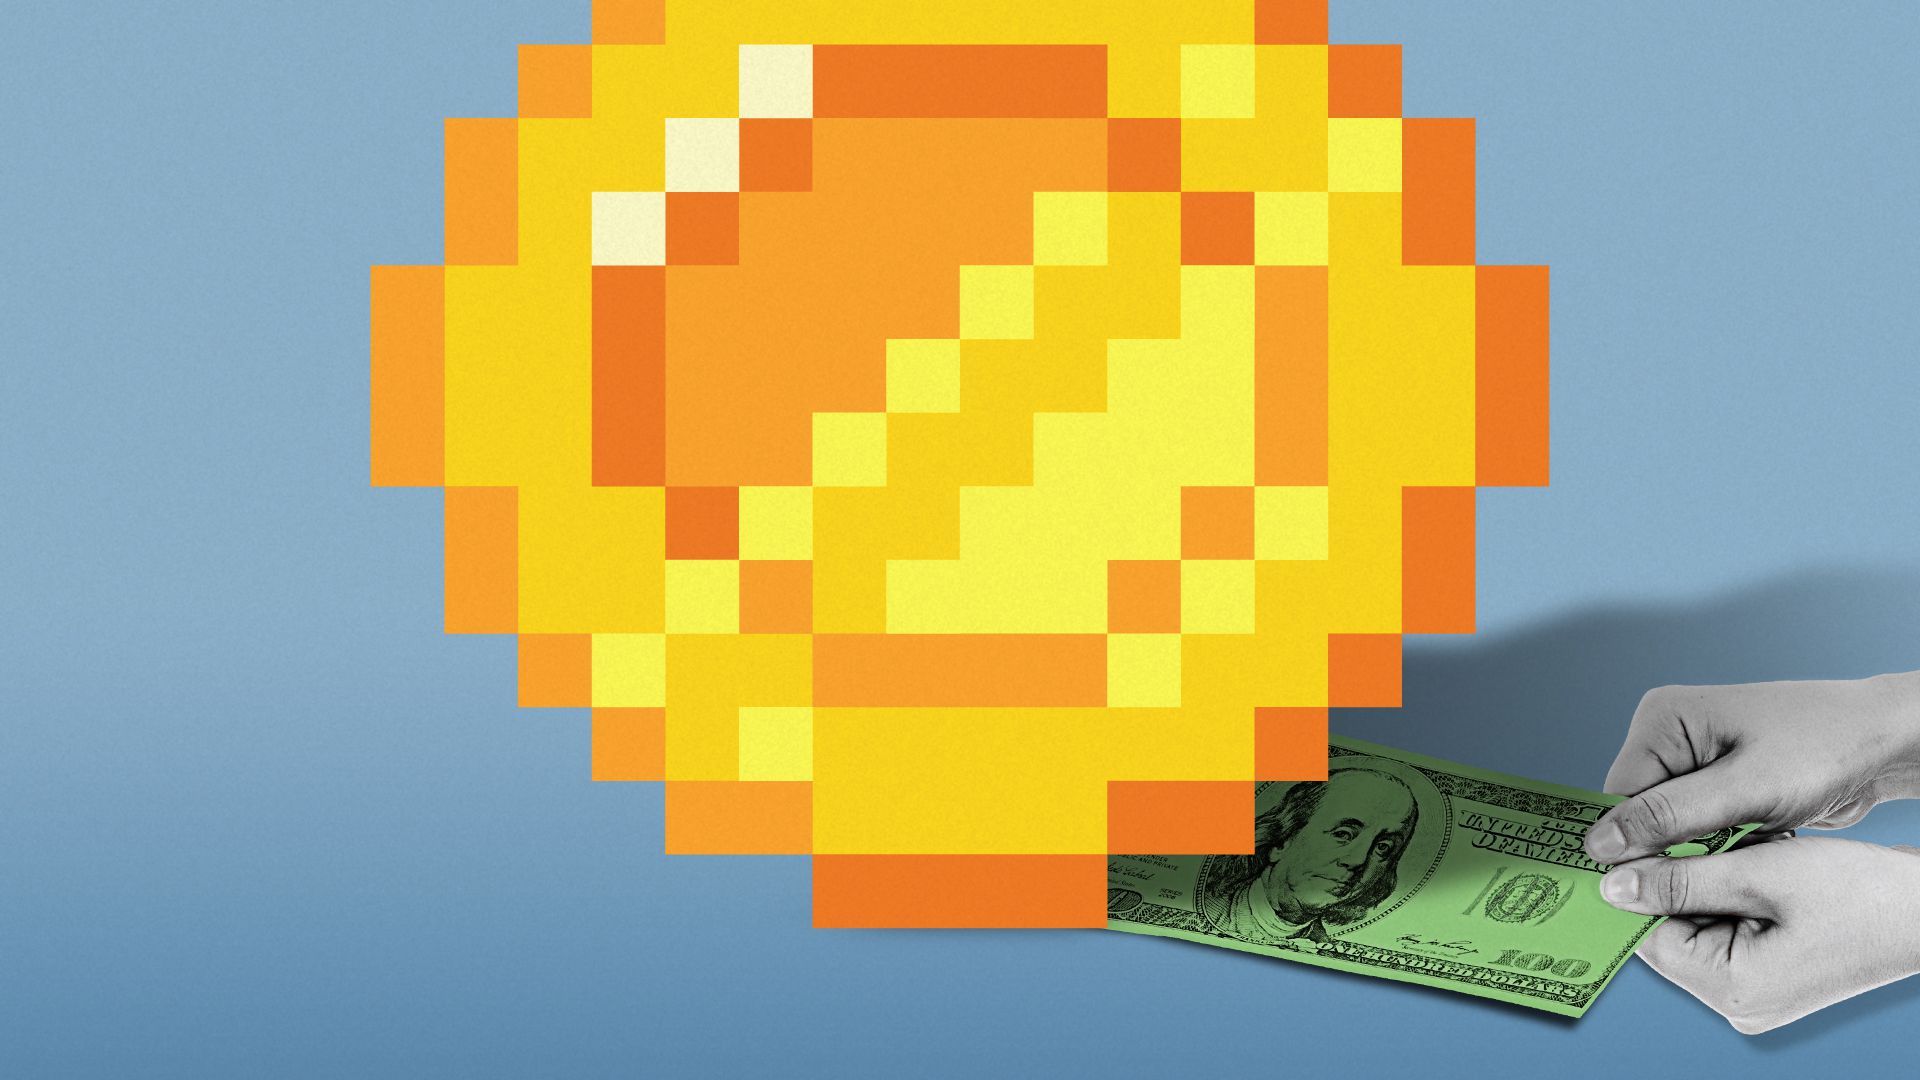 Illustration of hands trying to pull a one hundred dollar bill out from under a large pixelated coin.